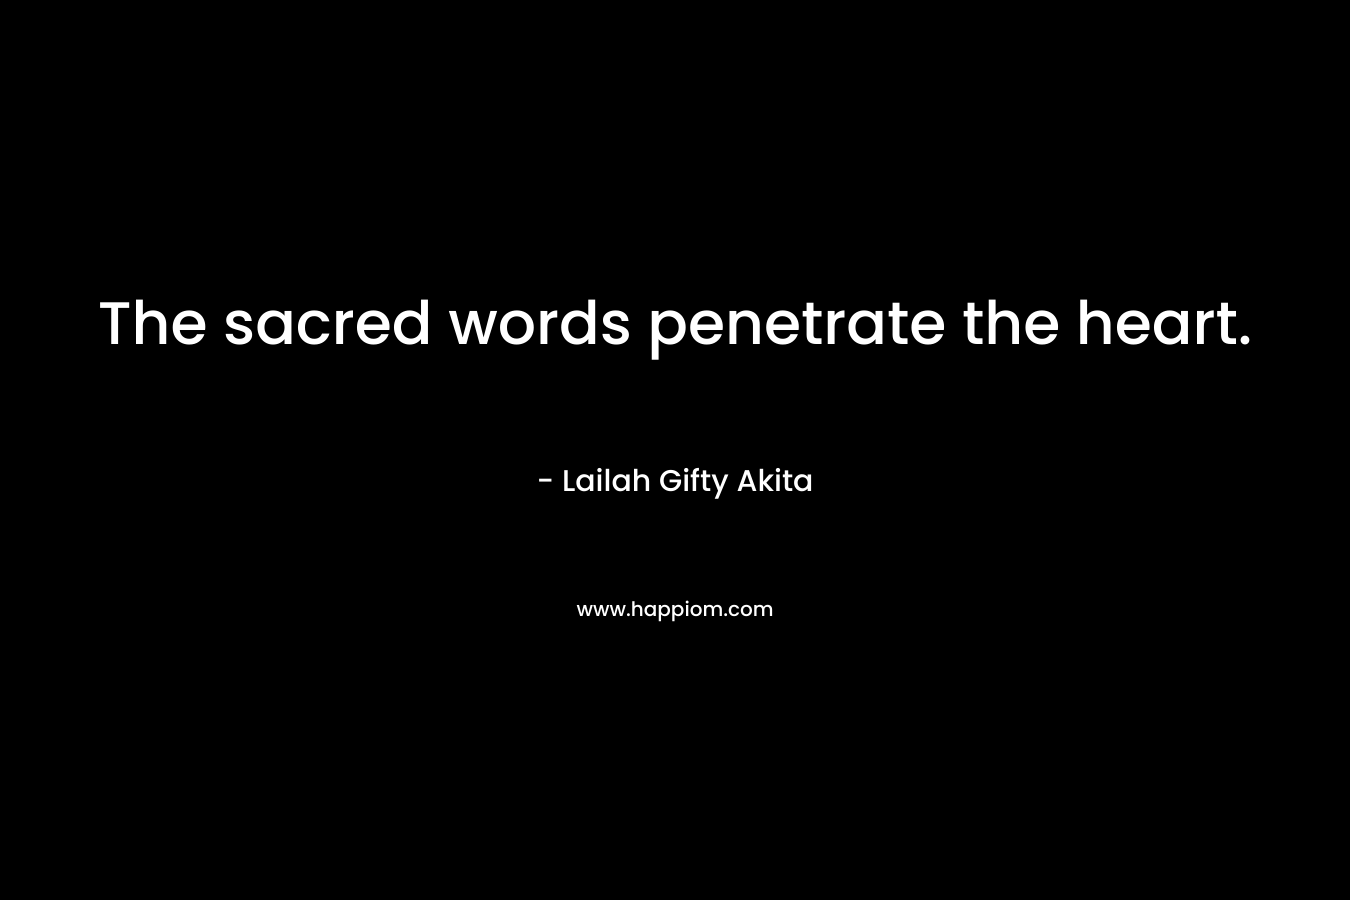 The sacred words penetrate the heart.